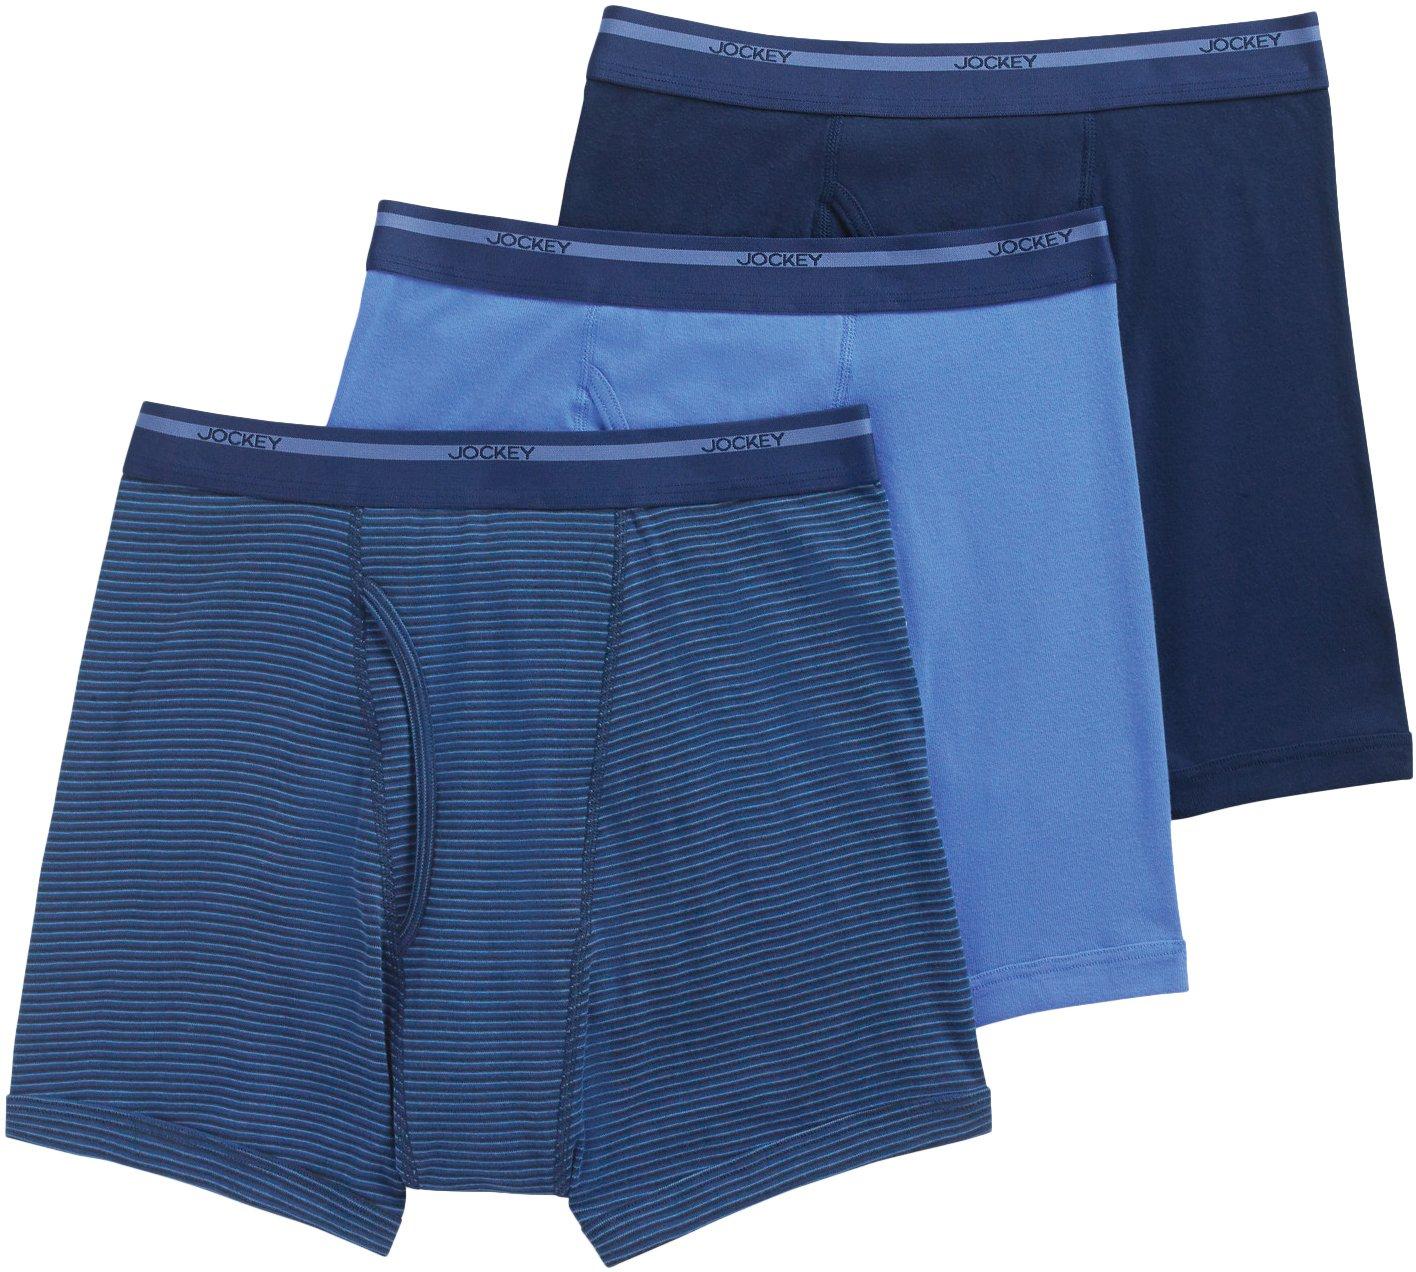  Pair of Thieves Super Fit Men's Trunks 3 Pack, Arches, Small :  Clothing, Shoes & Jewelry